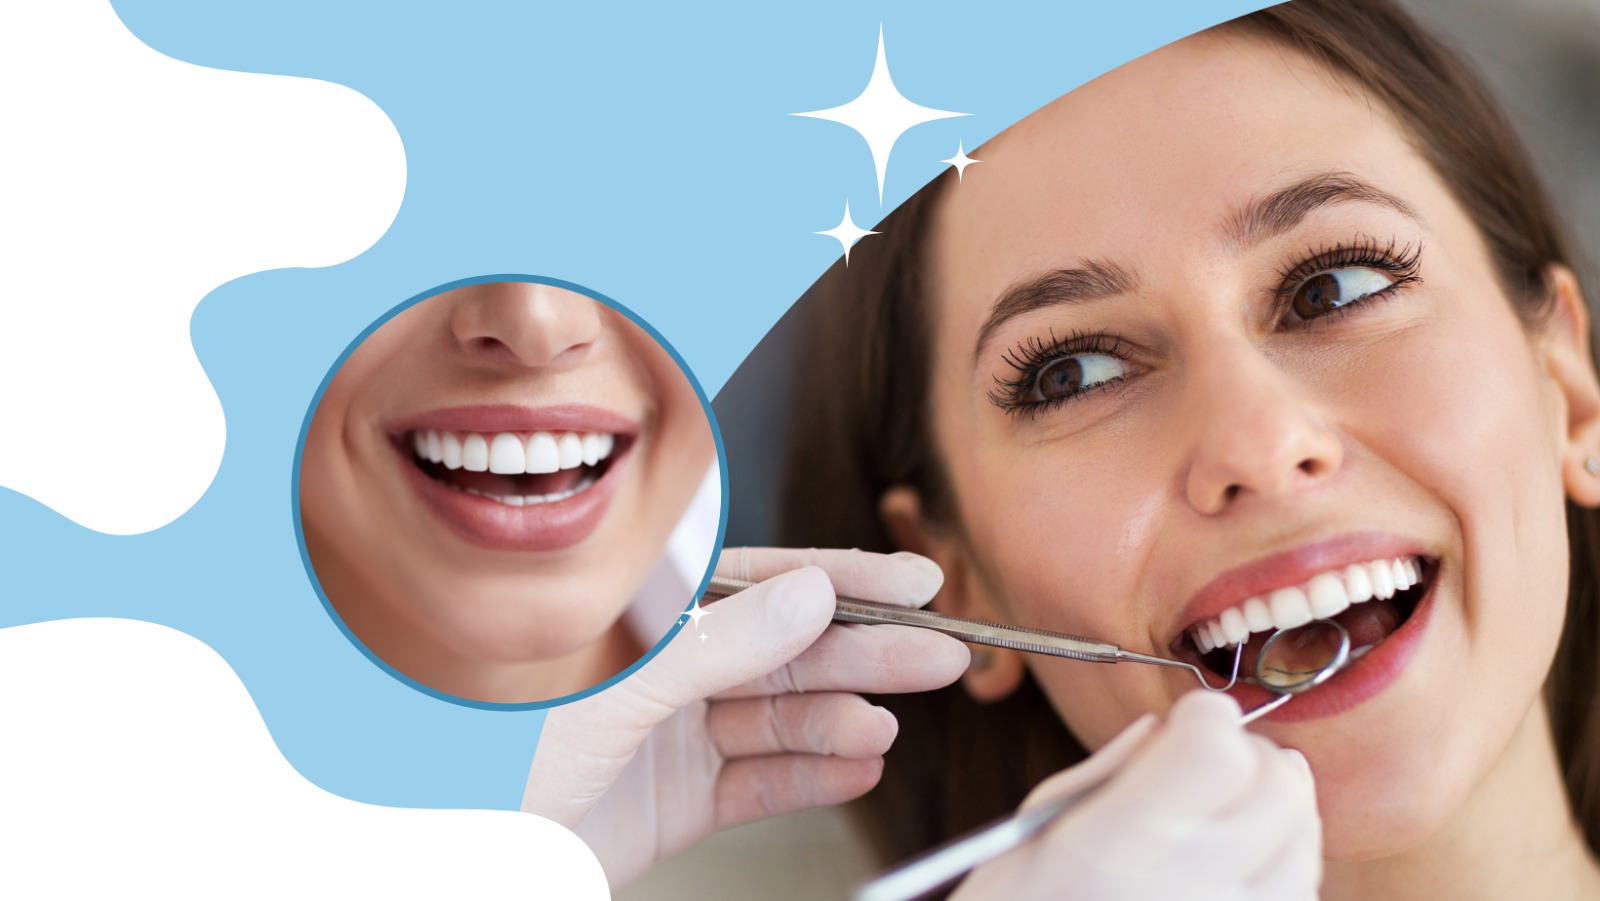 Smile Confidently: How Cosmetic Dentistry Can Transform Your Self-Esteem